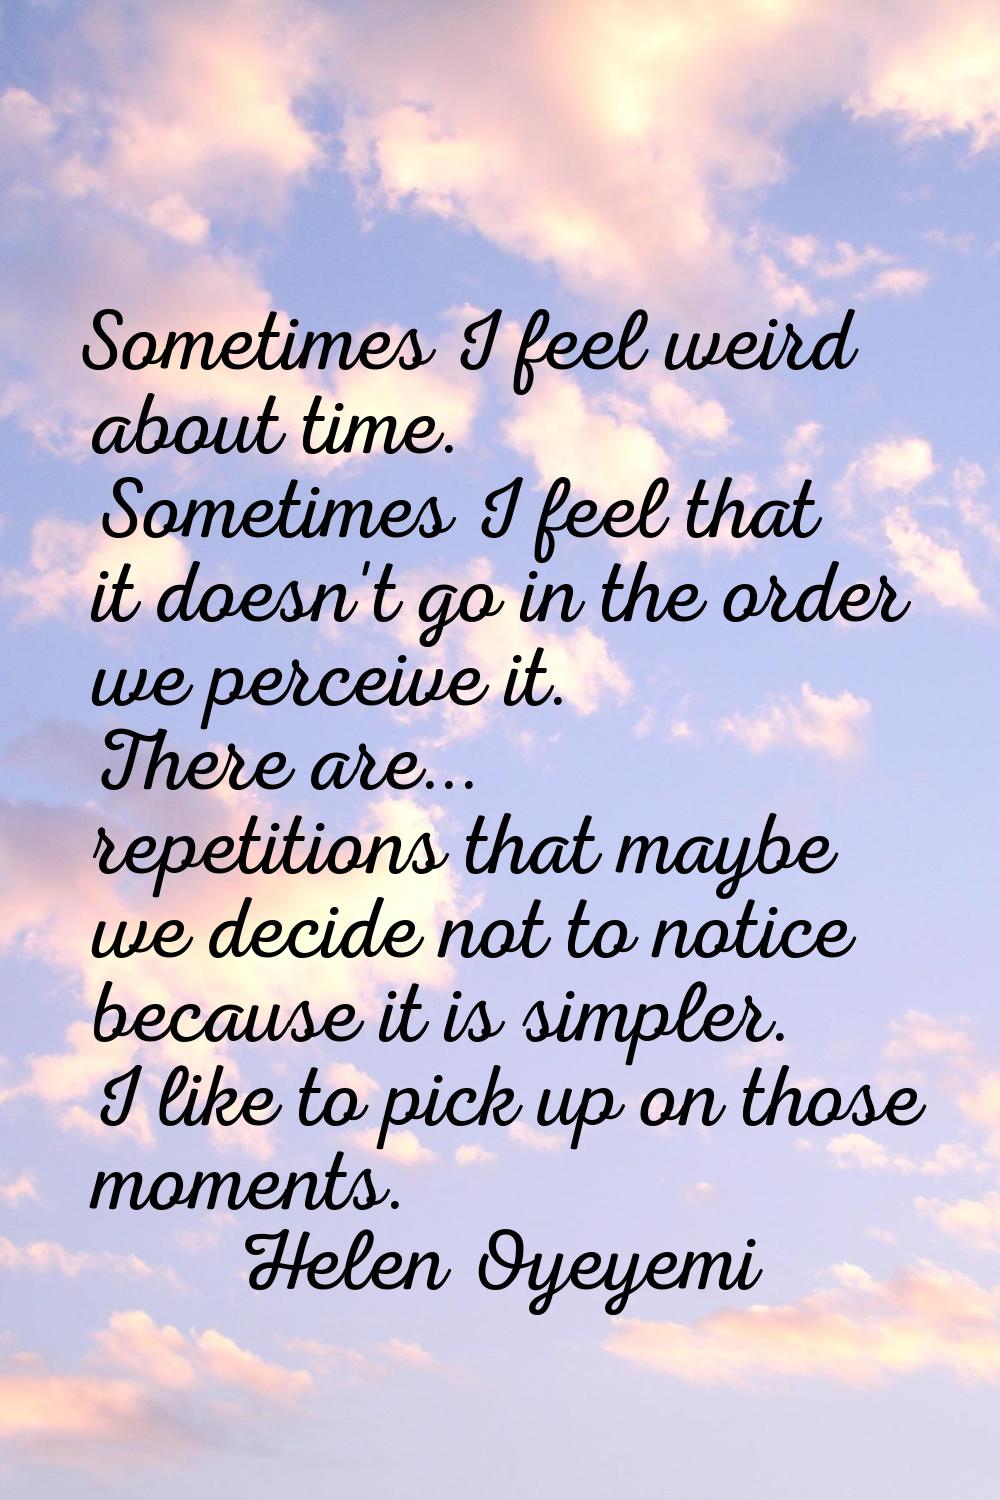 Sometimes I feel weird about time. Sometimes I feel that it doesn't go in the order we perceive it.